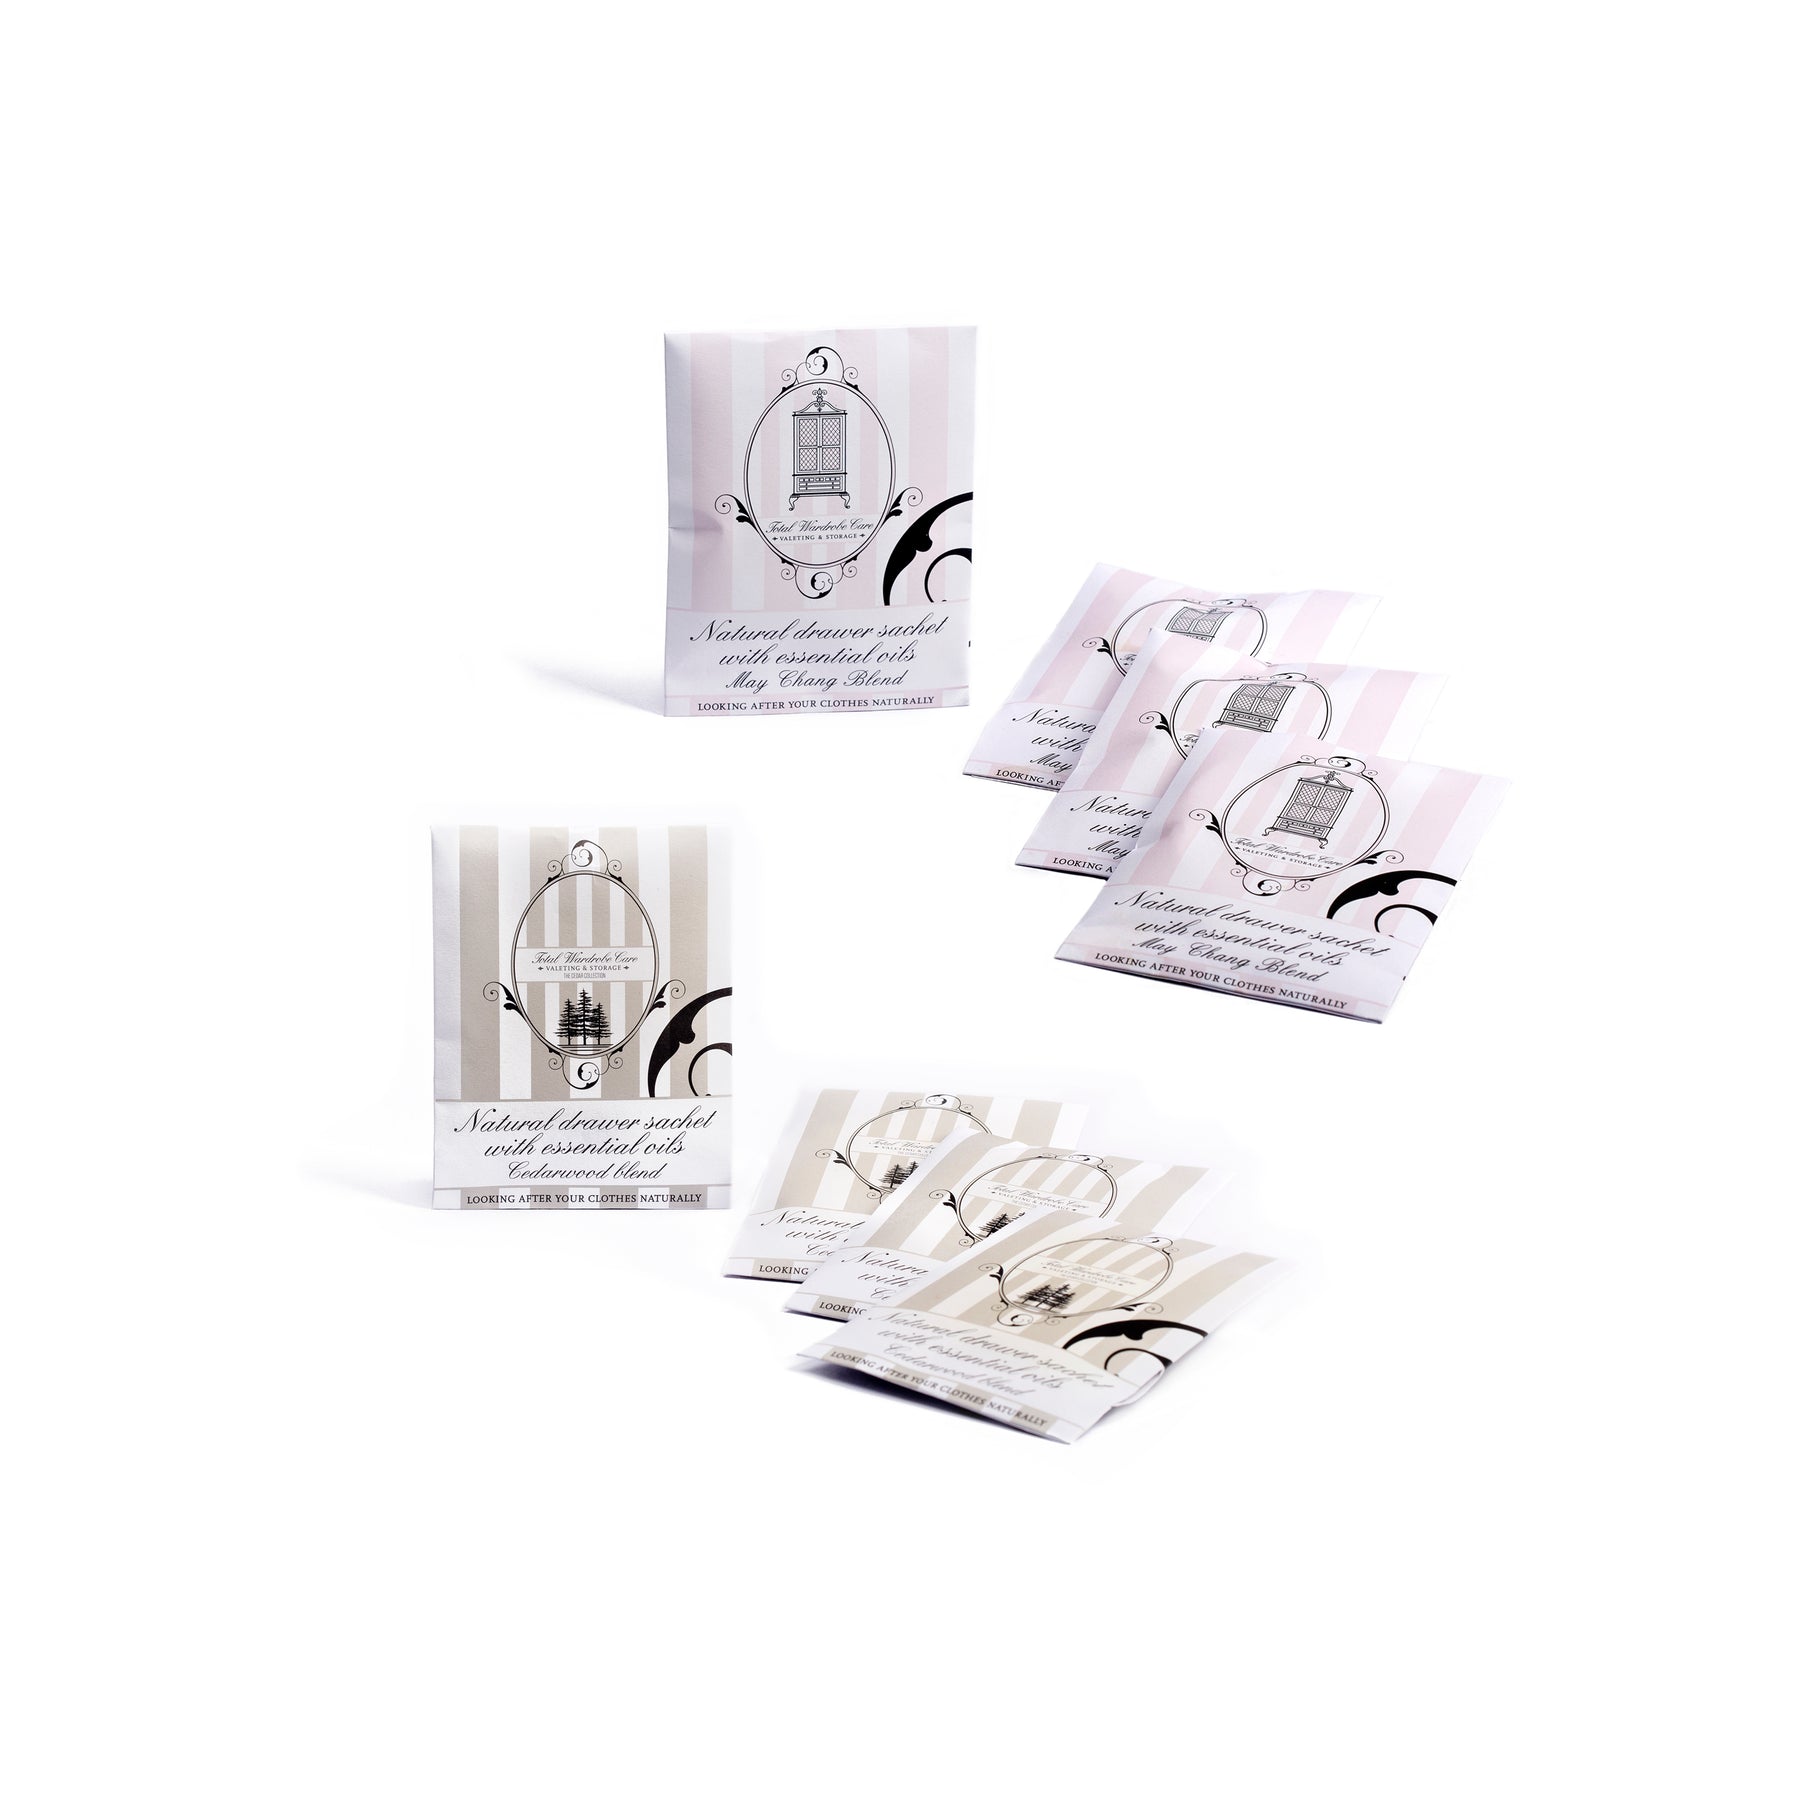 Cedarwood and may chang drawer sachets lined on white background